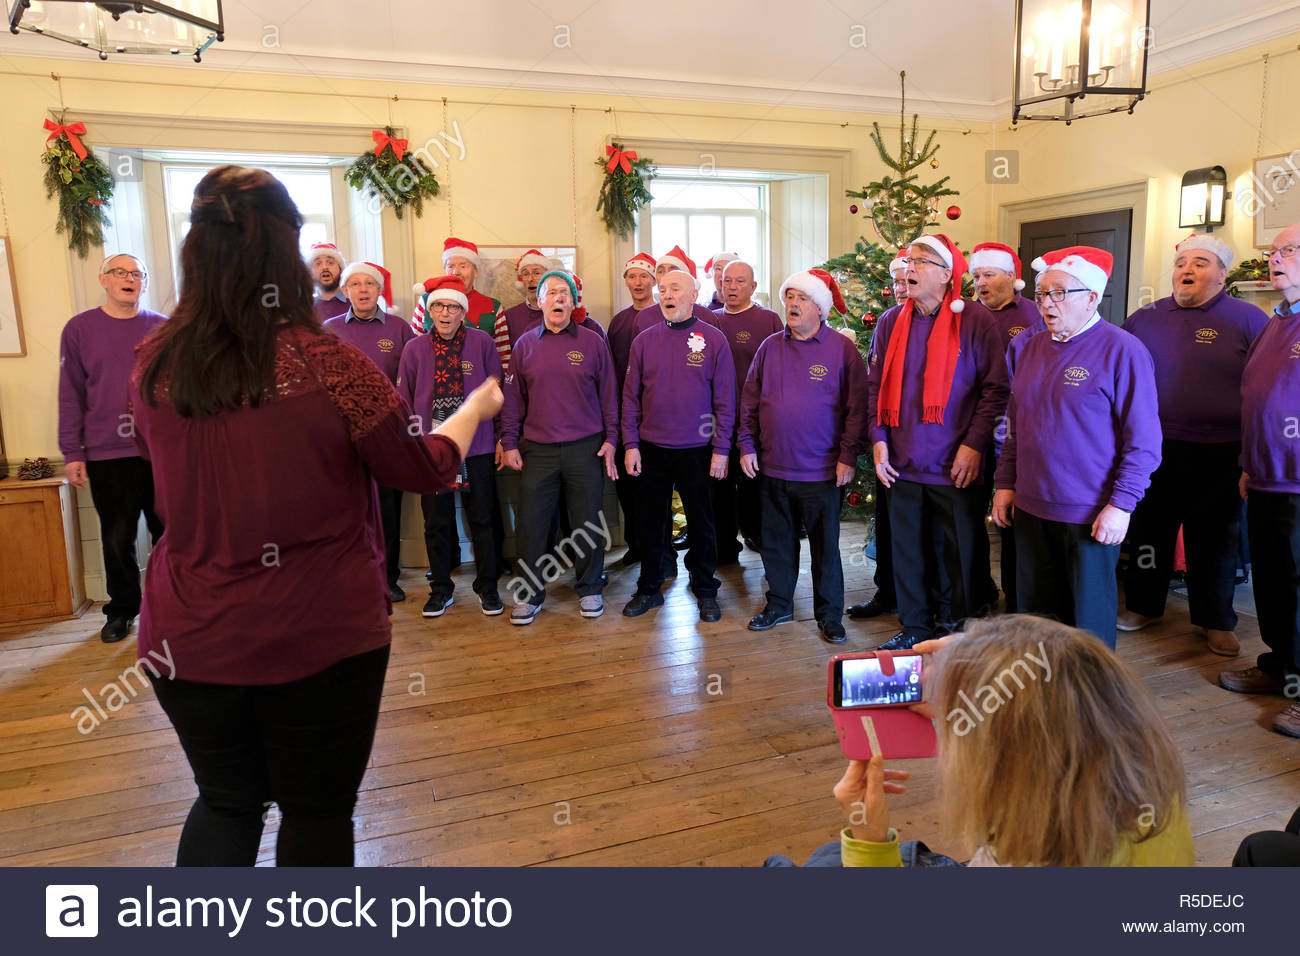 Edinburgh, Scotland, United Kingdom. 1st December,  2018.  The Rolling Hills Chorus performs for St. Andrew Fair Event at the Botanic Cottage, Royal Botanic Garden, raising money for the Cyrenians charity helping the homeless.  Credit: Craig Brown/Alamy Live News. Stock Photo